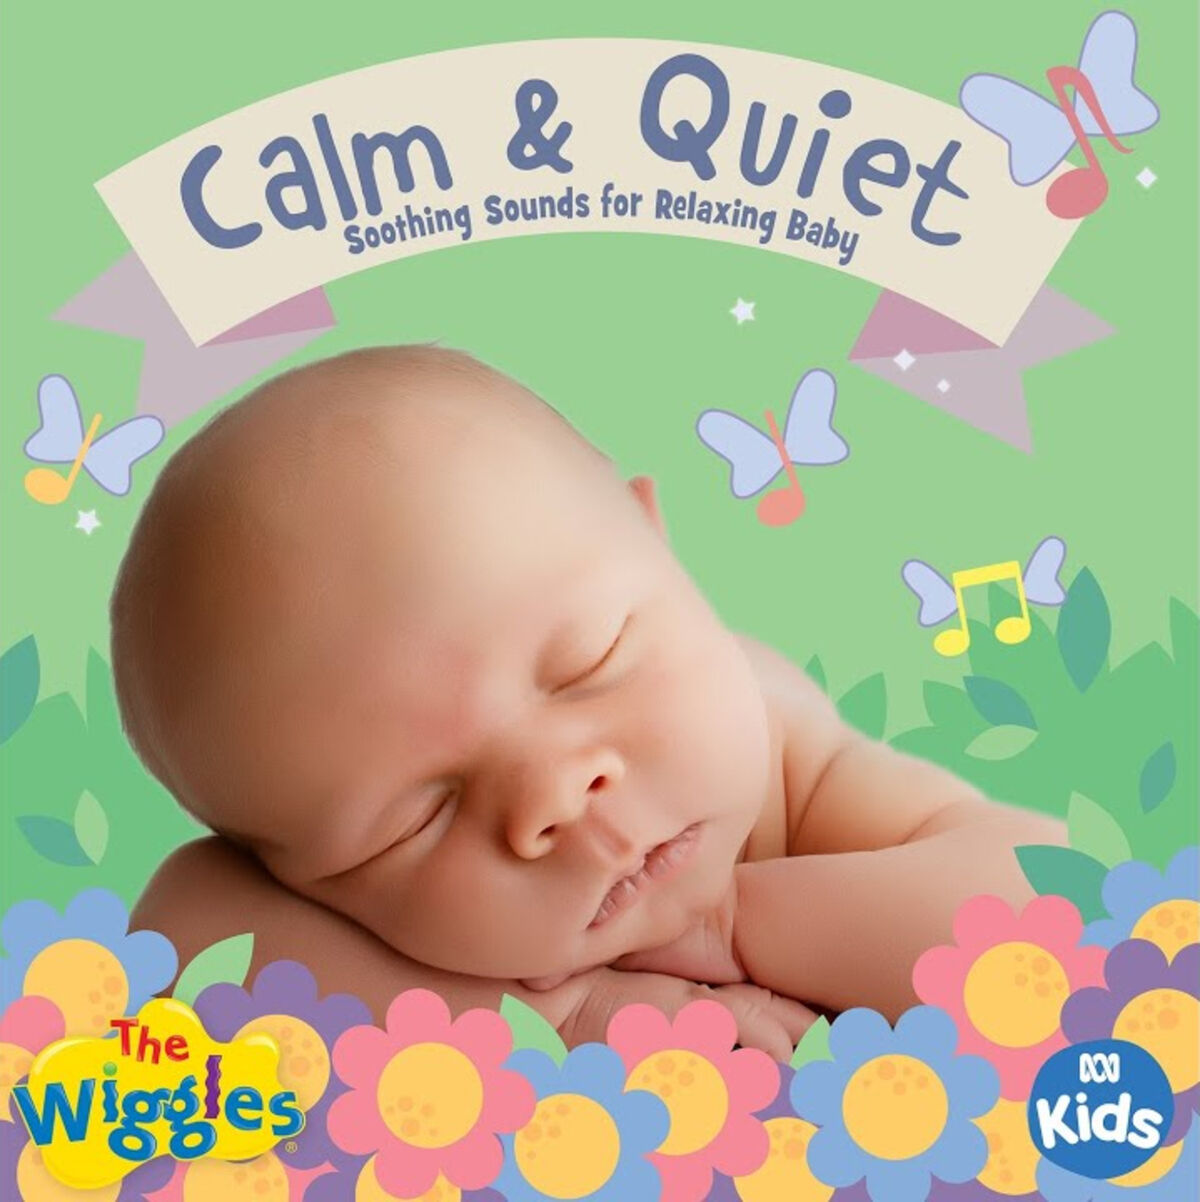 Calm & Quiet: Soothing Sounds for Relaxing Baby, Wigglepedia